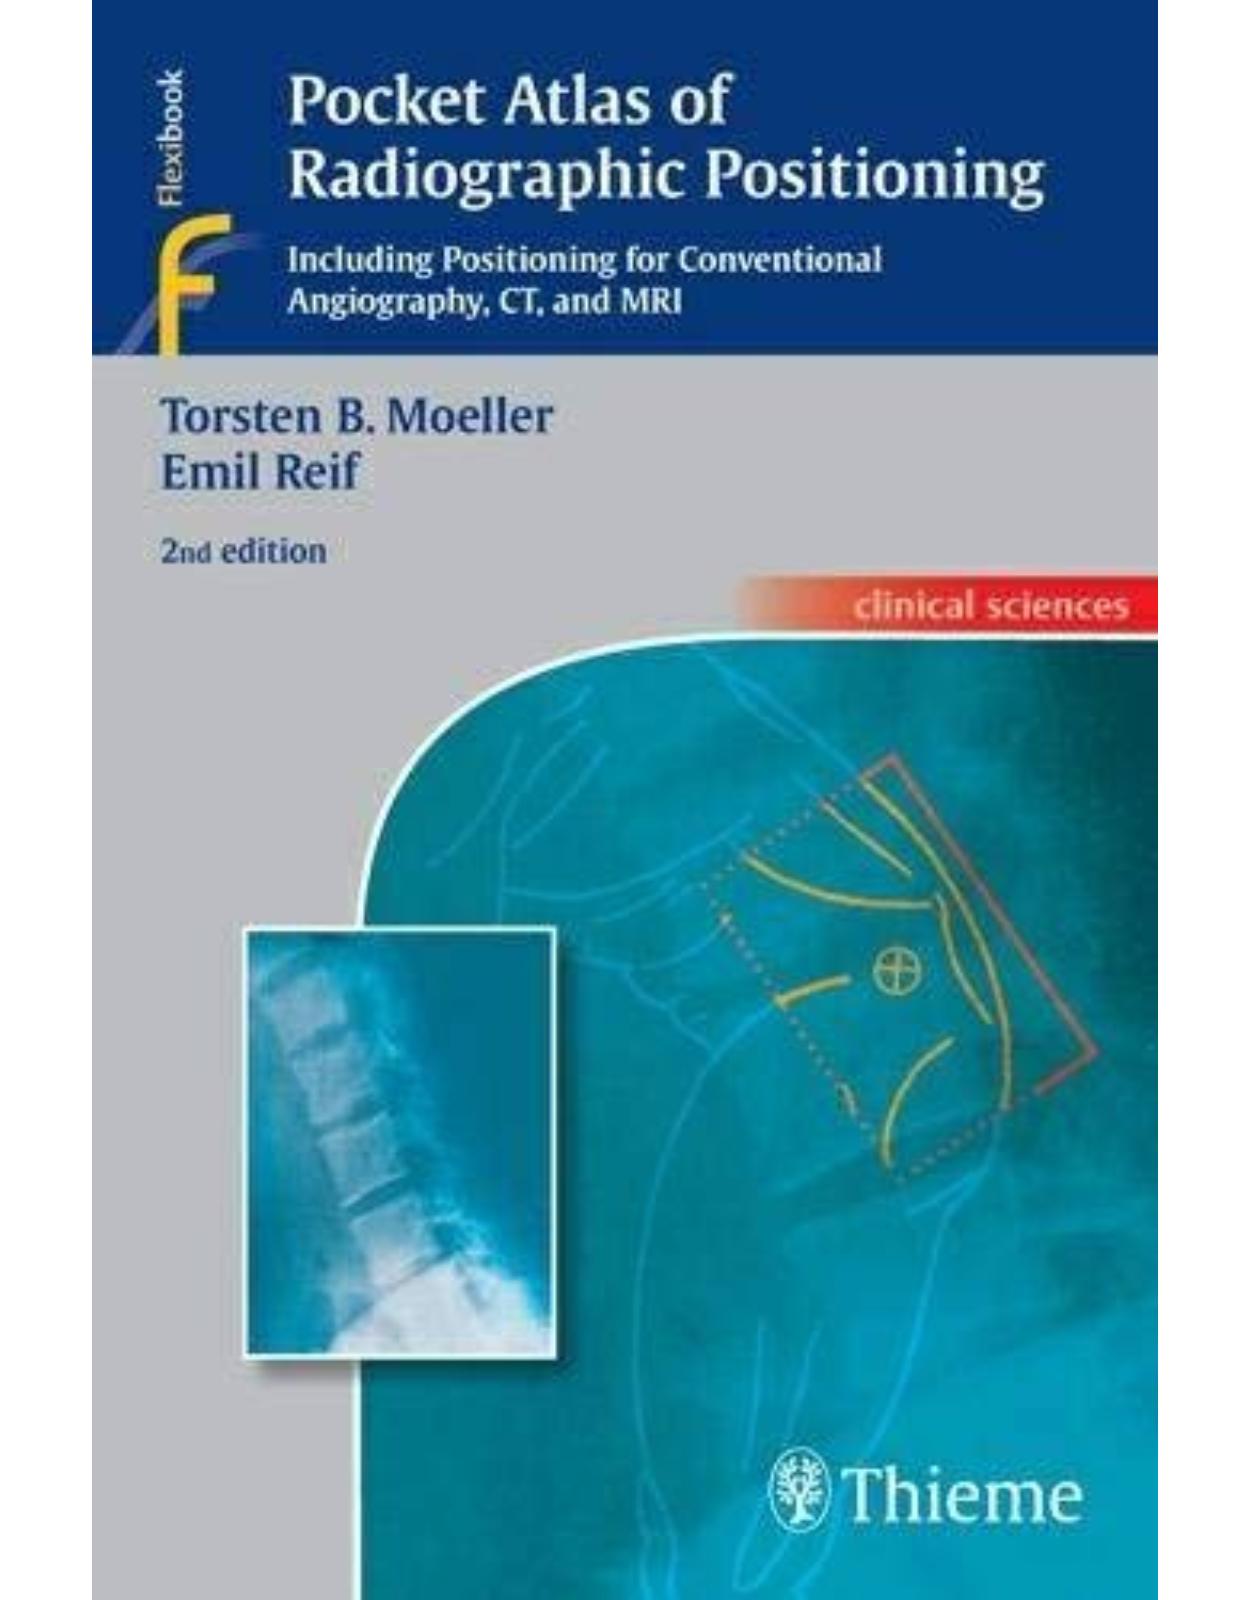 Pocket Atlas of Radiographic Positioning. Including Positioning for Conventional Angio-graphy, Ct, and MRI